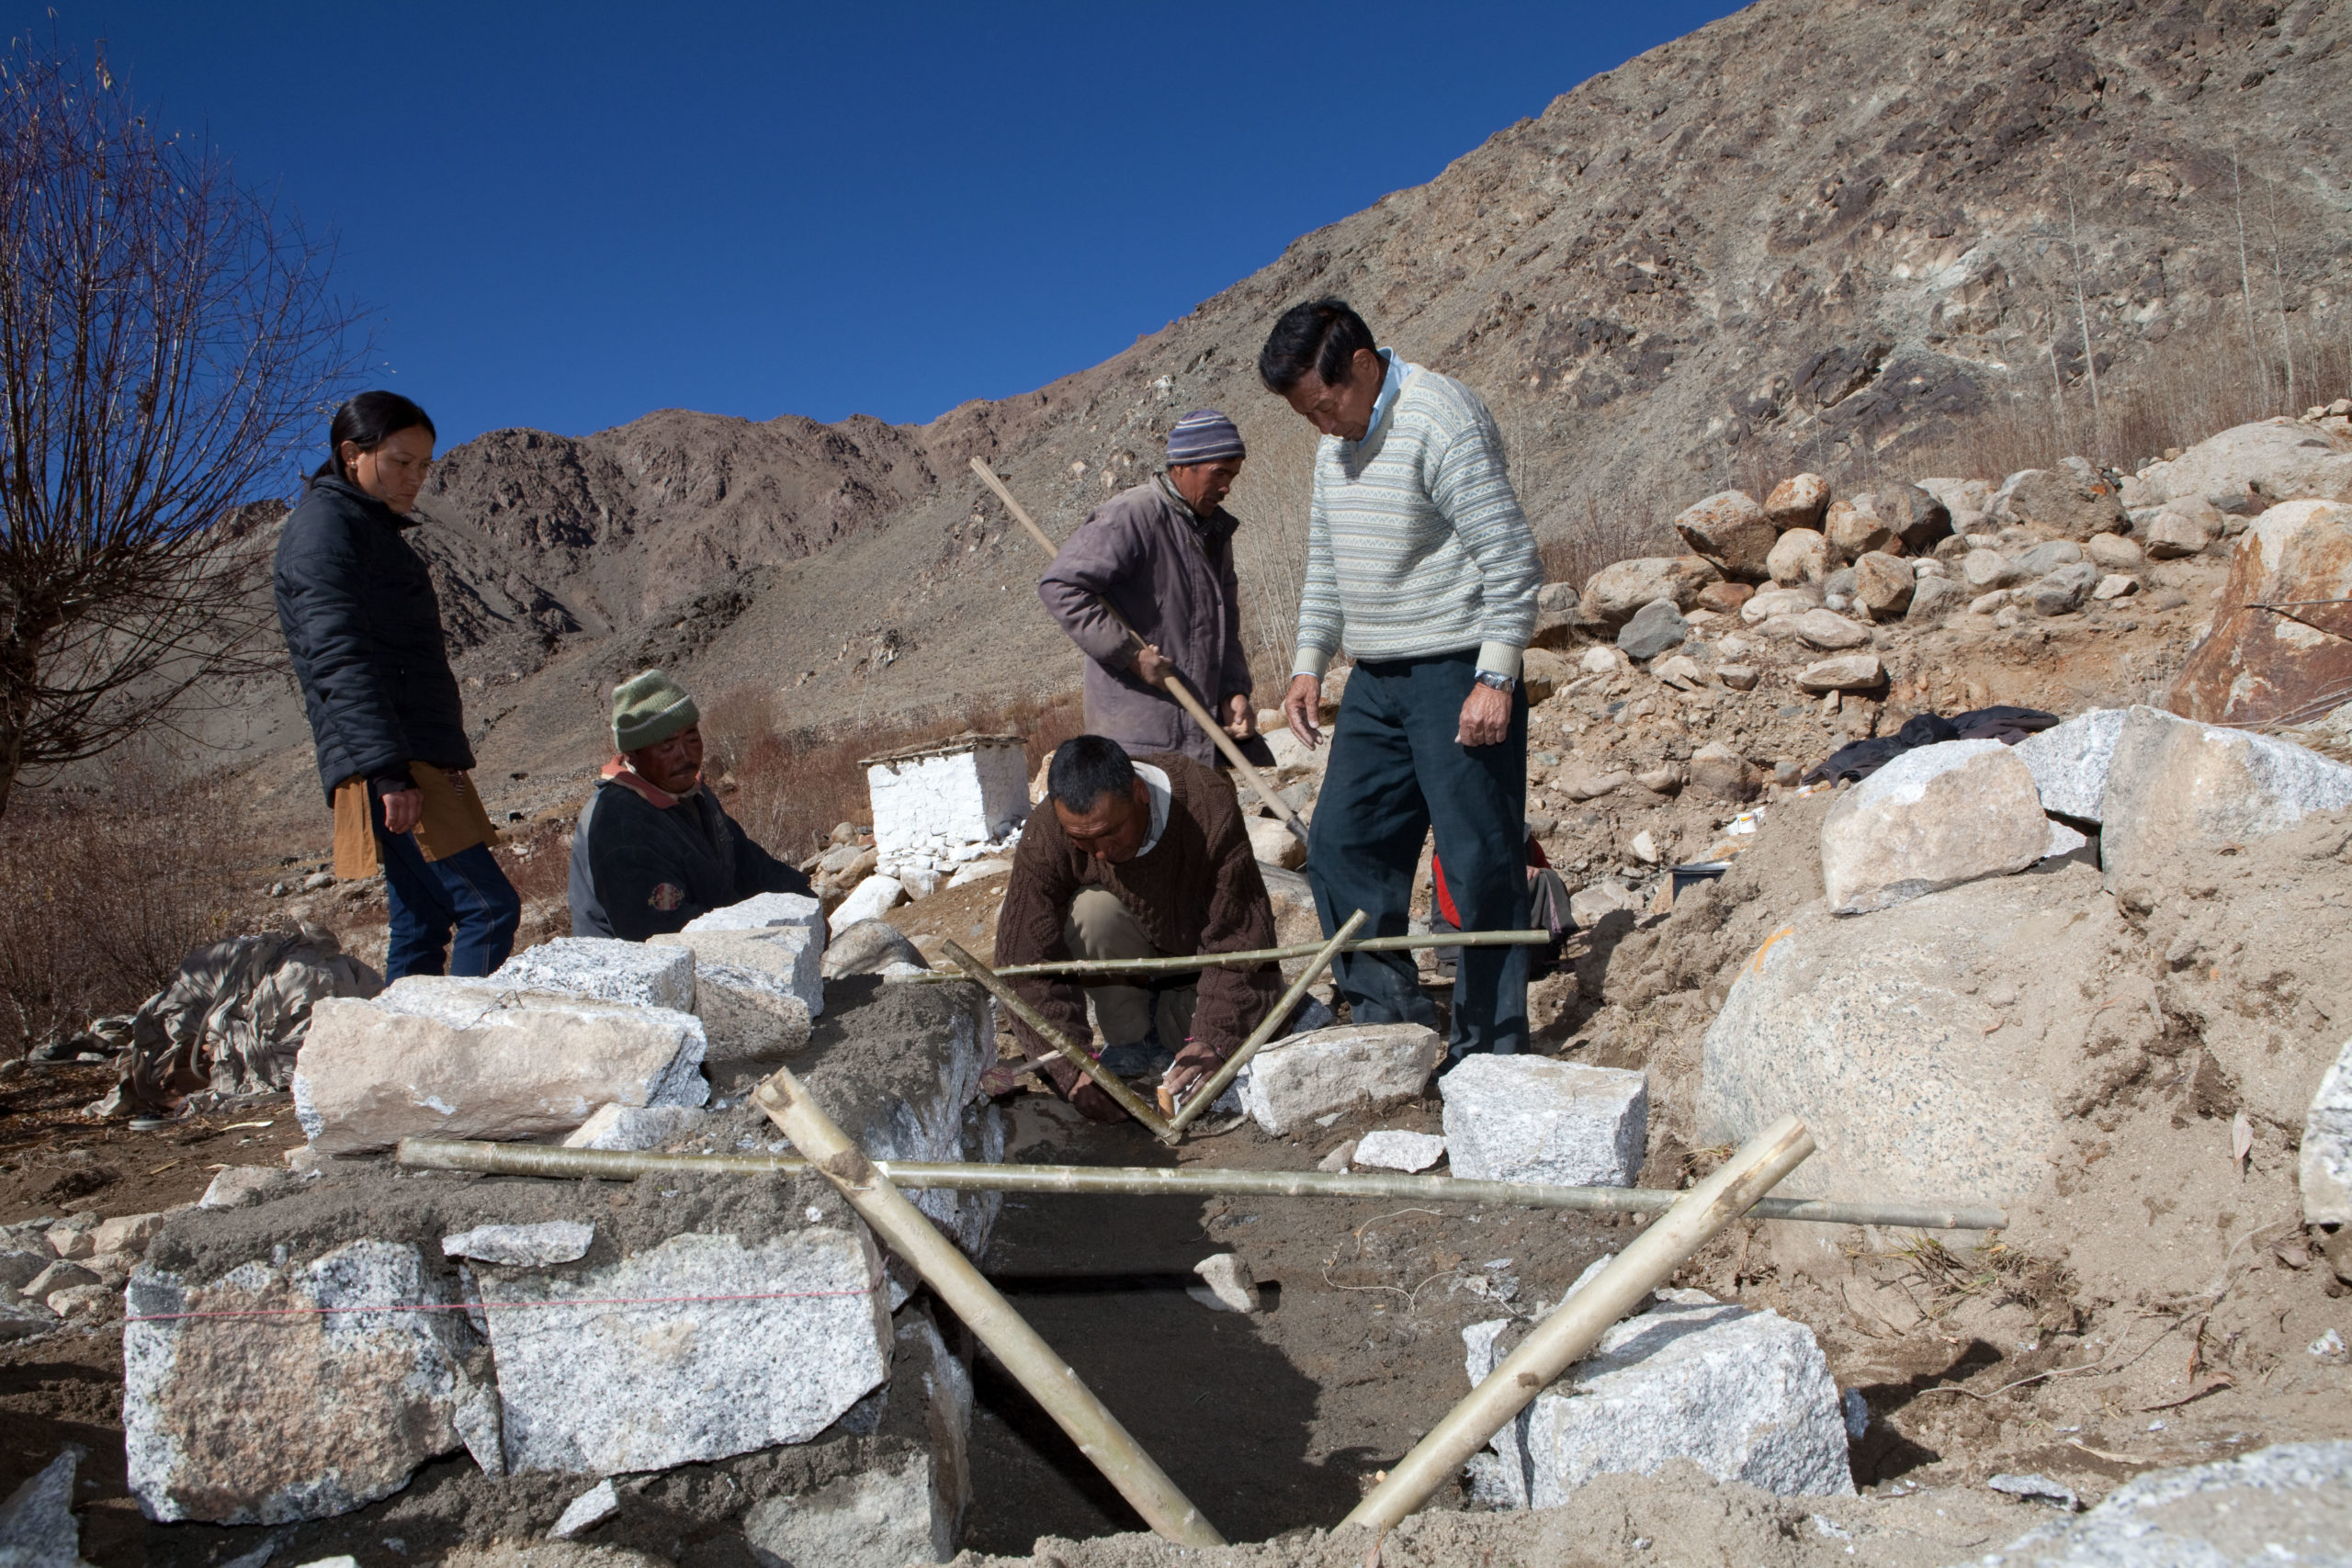 <p>A project to create an artificial glacier in Ladakh, northwest India. The project is a way of adapting to glacier retreat, as the artificial glacier melts during spring, bringing water to nearby villages. (Image: Emma Stoner / Alamy)</p>